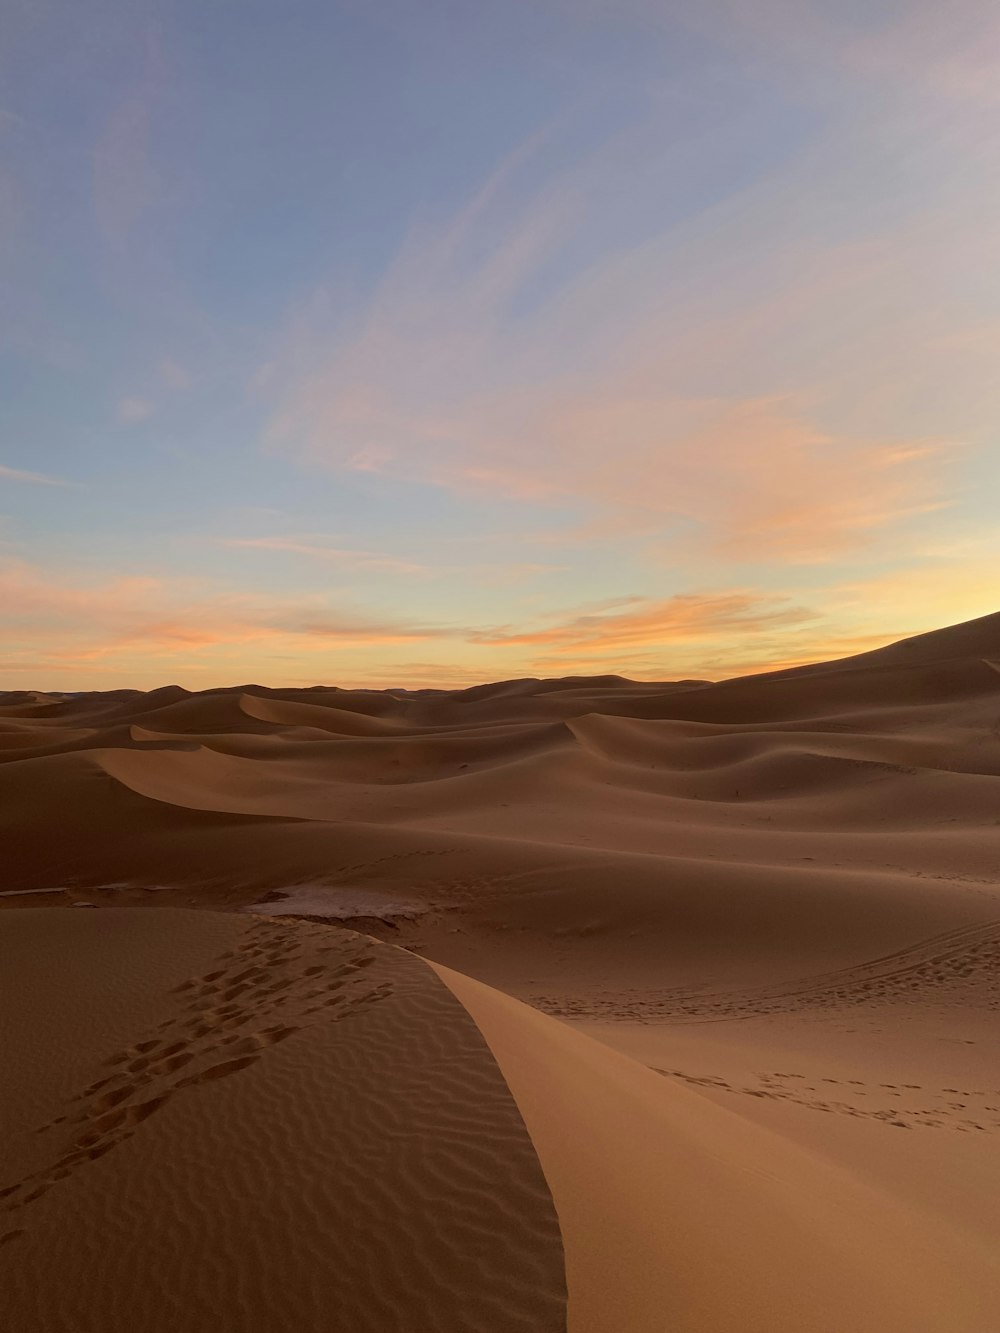 a sunset in the desert with footprints in the sand